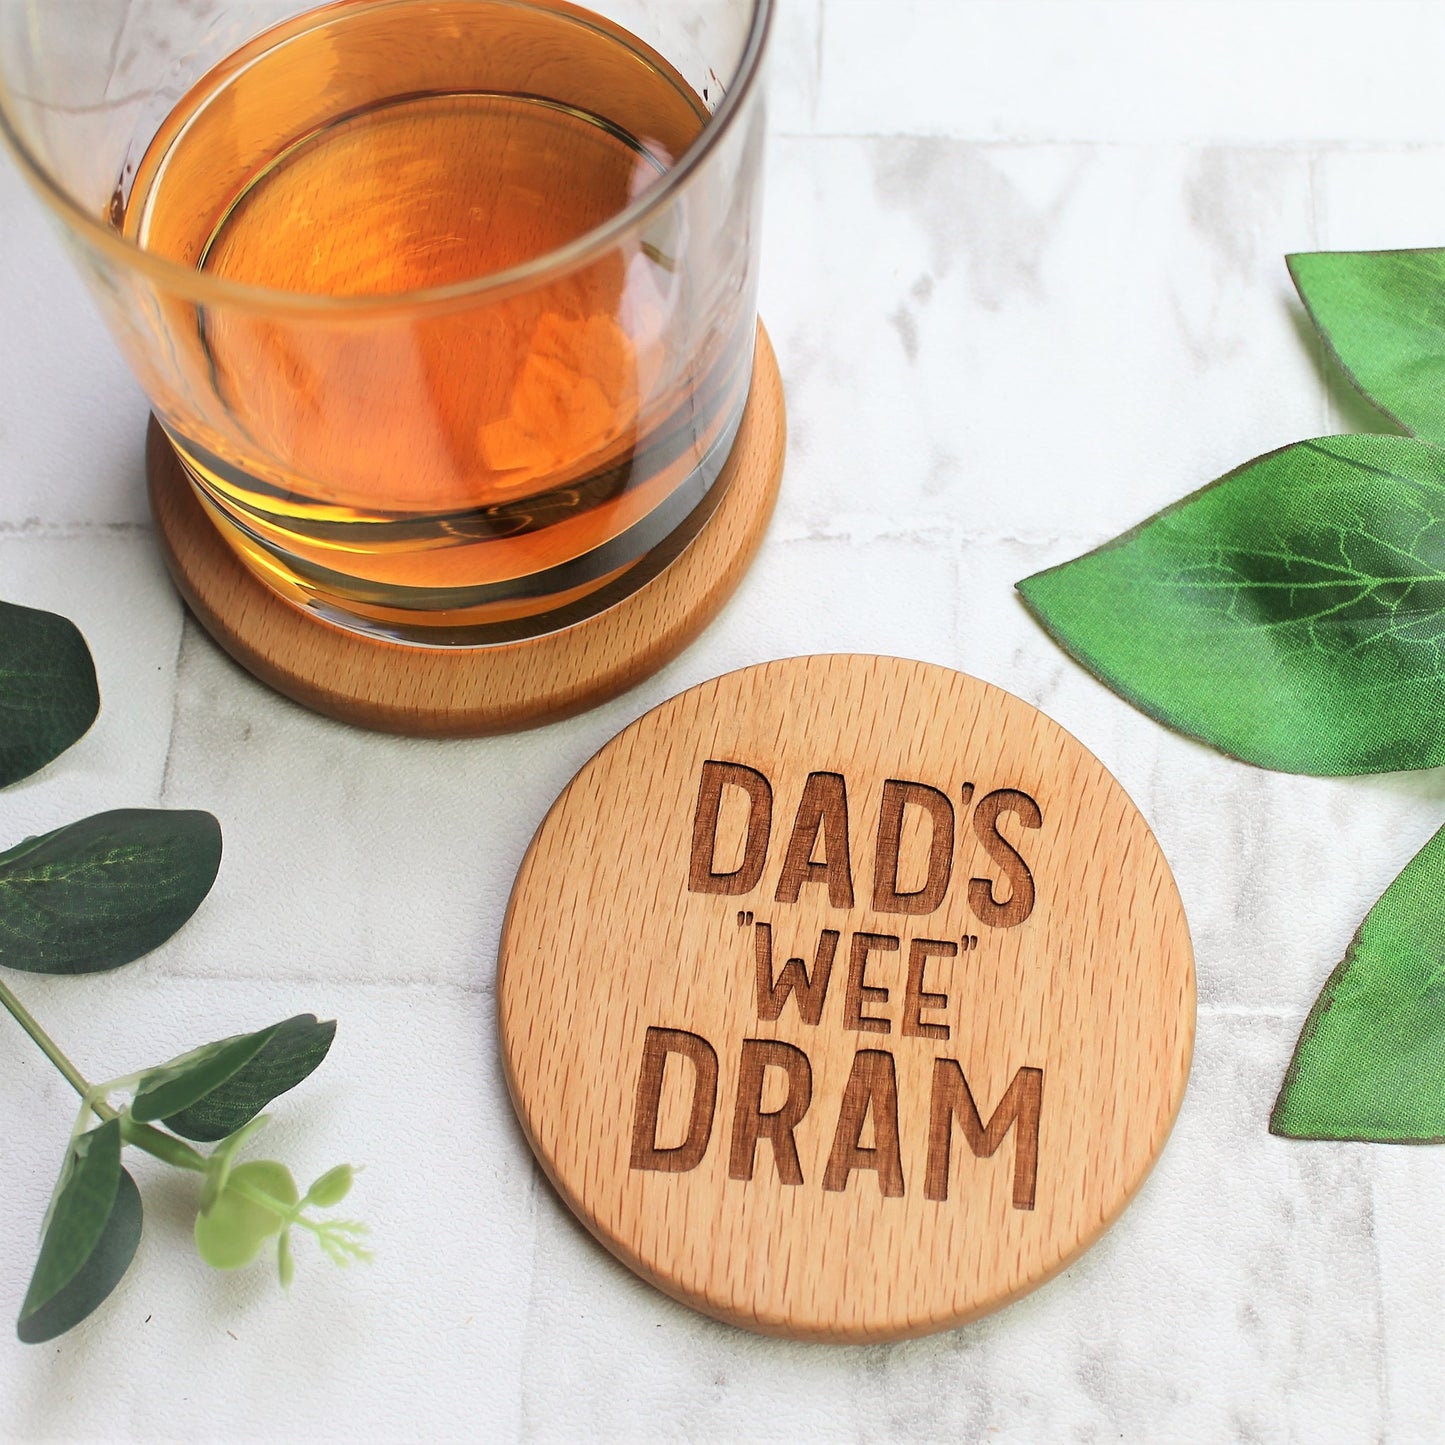 dads wee dram, custom engraved wooden round coaster for fathers day 